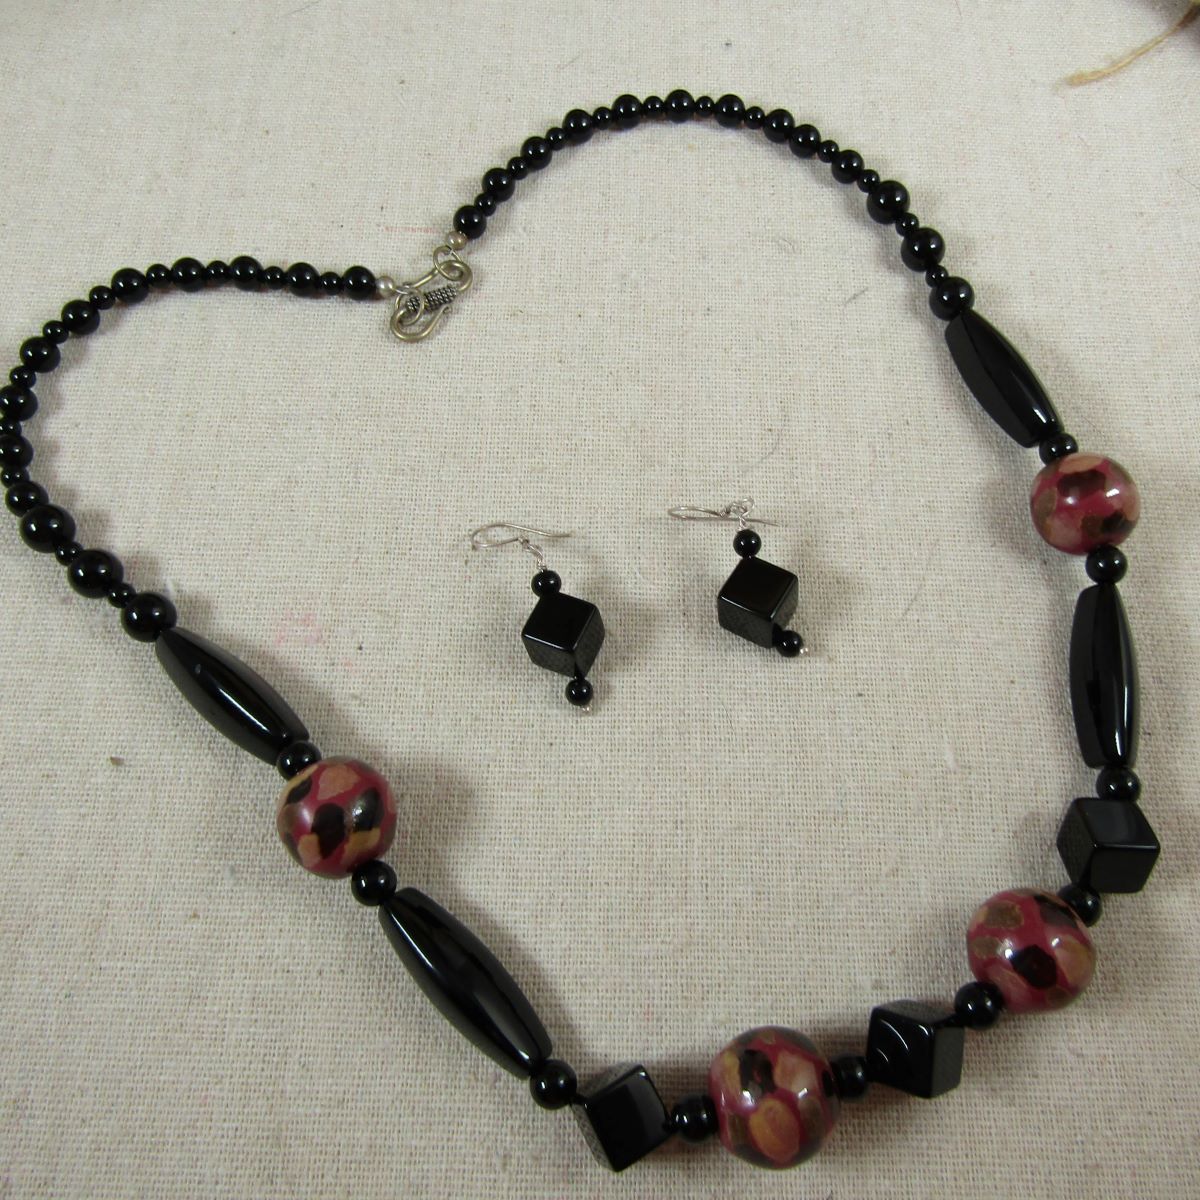 Onyx Necklace With Fair Trade Kazuri Bead Accents & Earrings - VP's Jewelry 